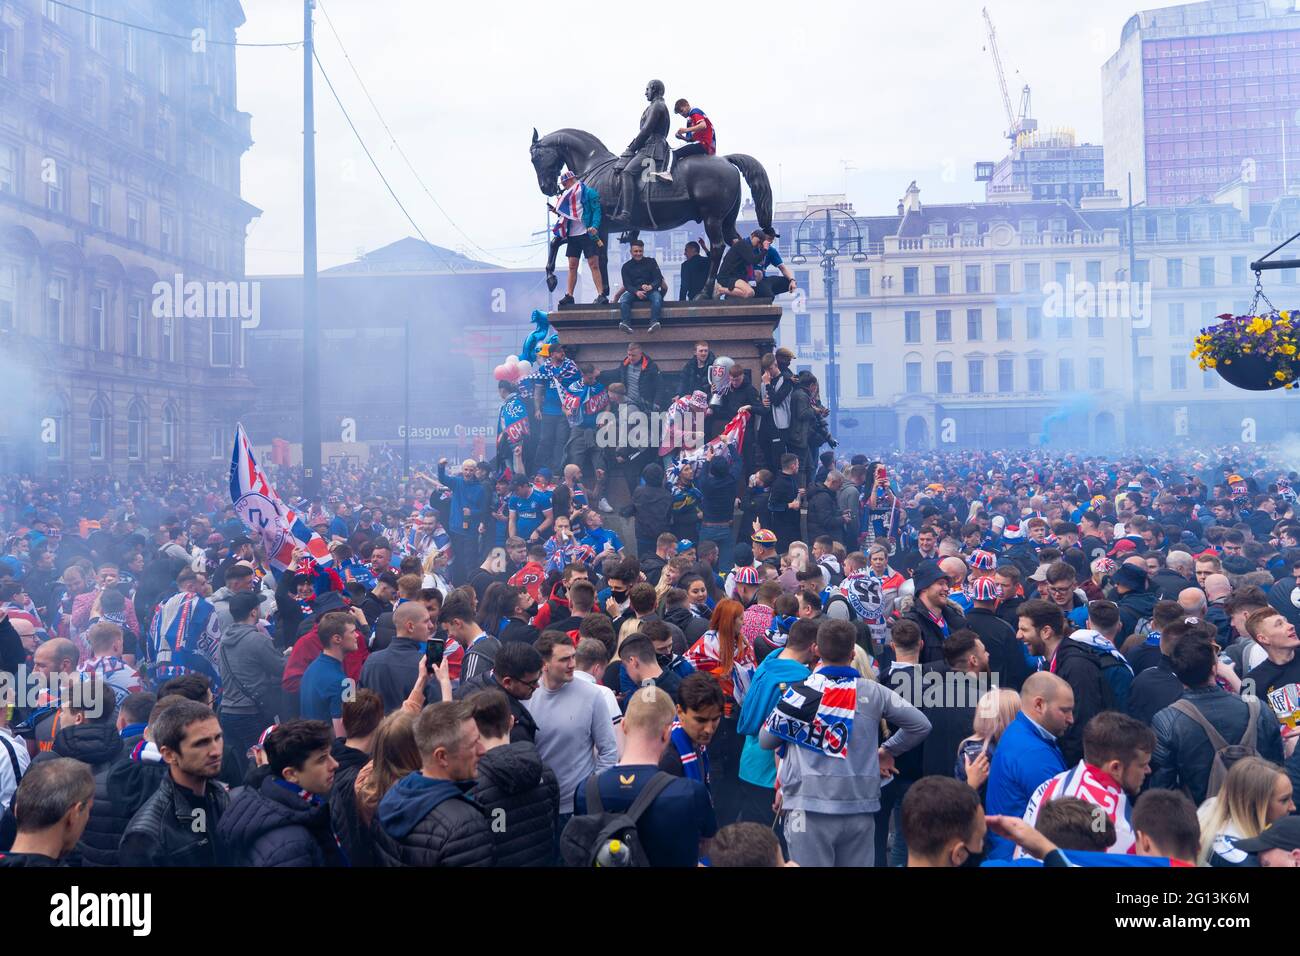 Scenes from George Square in Glasgow following Rangers 55th league title win and thousands of supporters gathered to celebrate, Scotland, UK Stock Photo